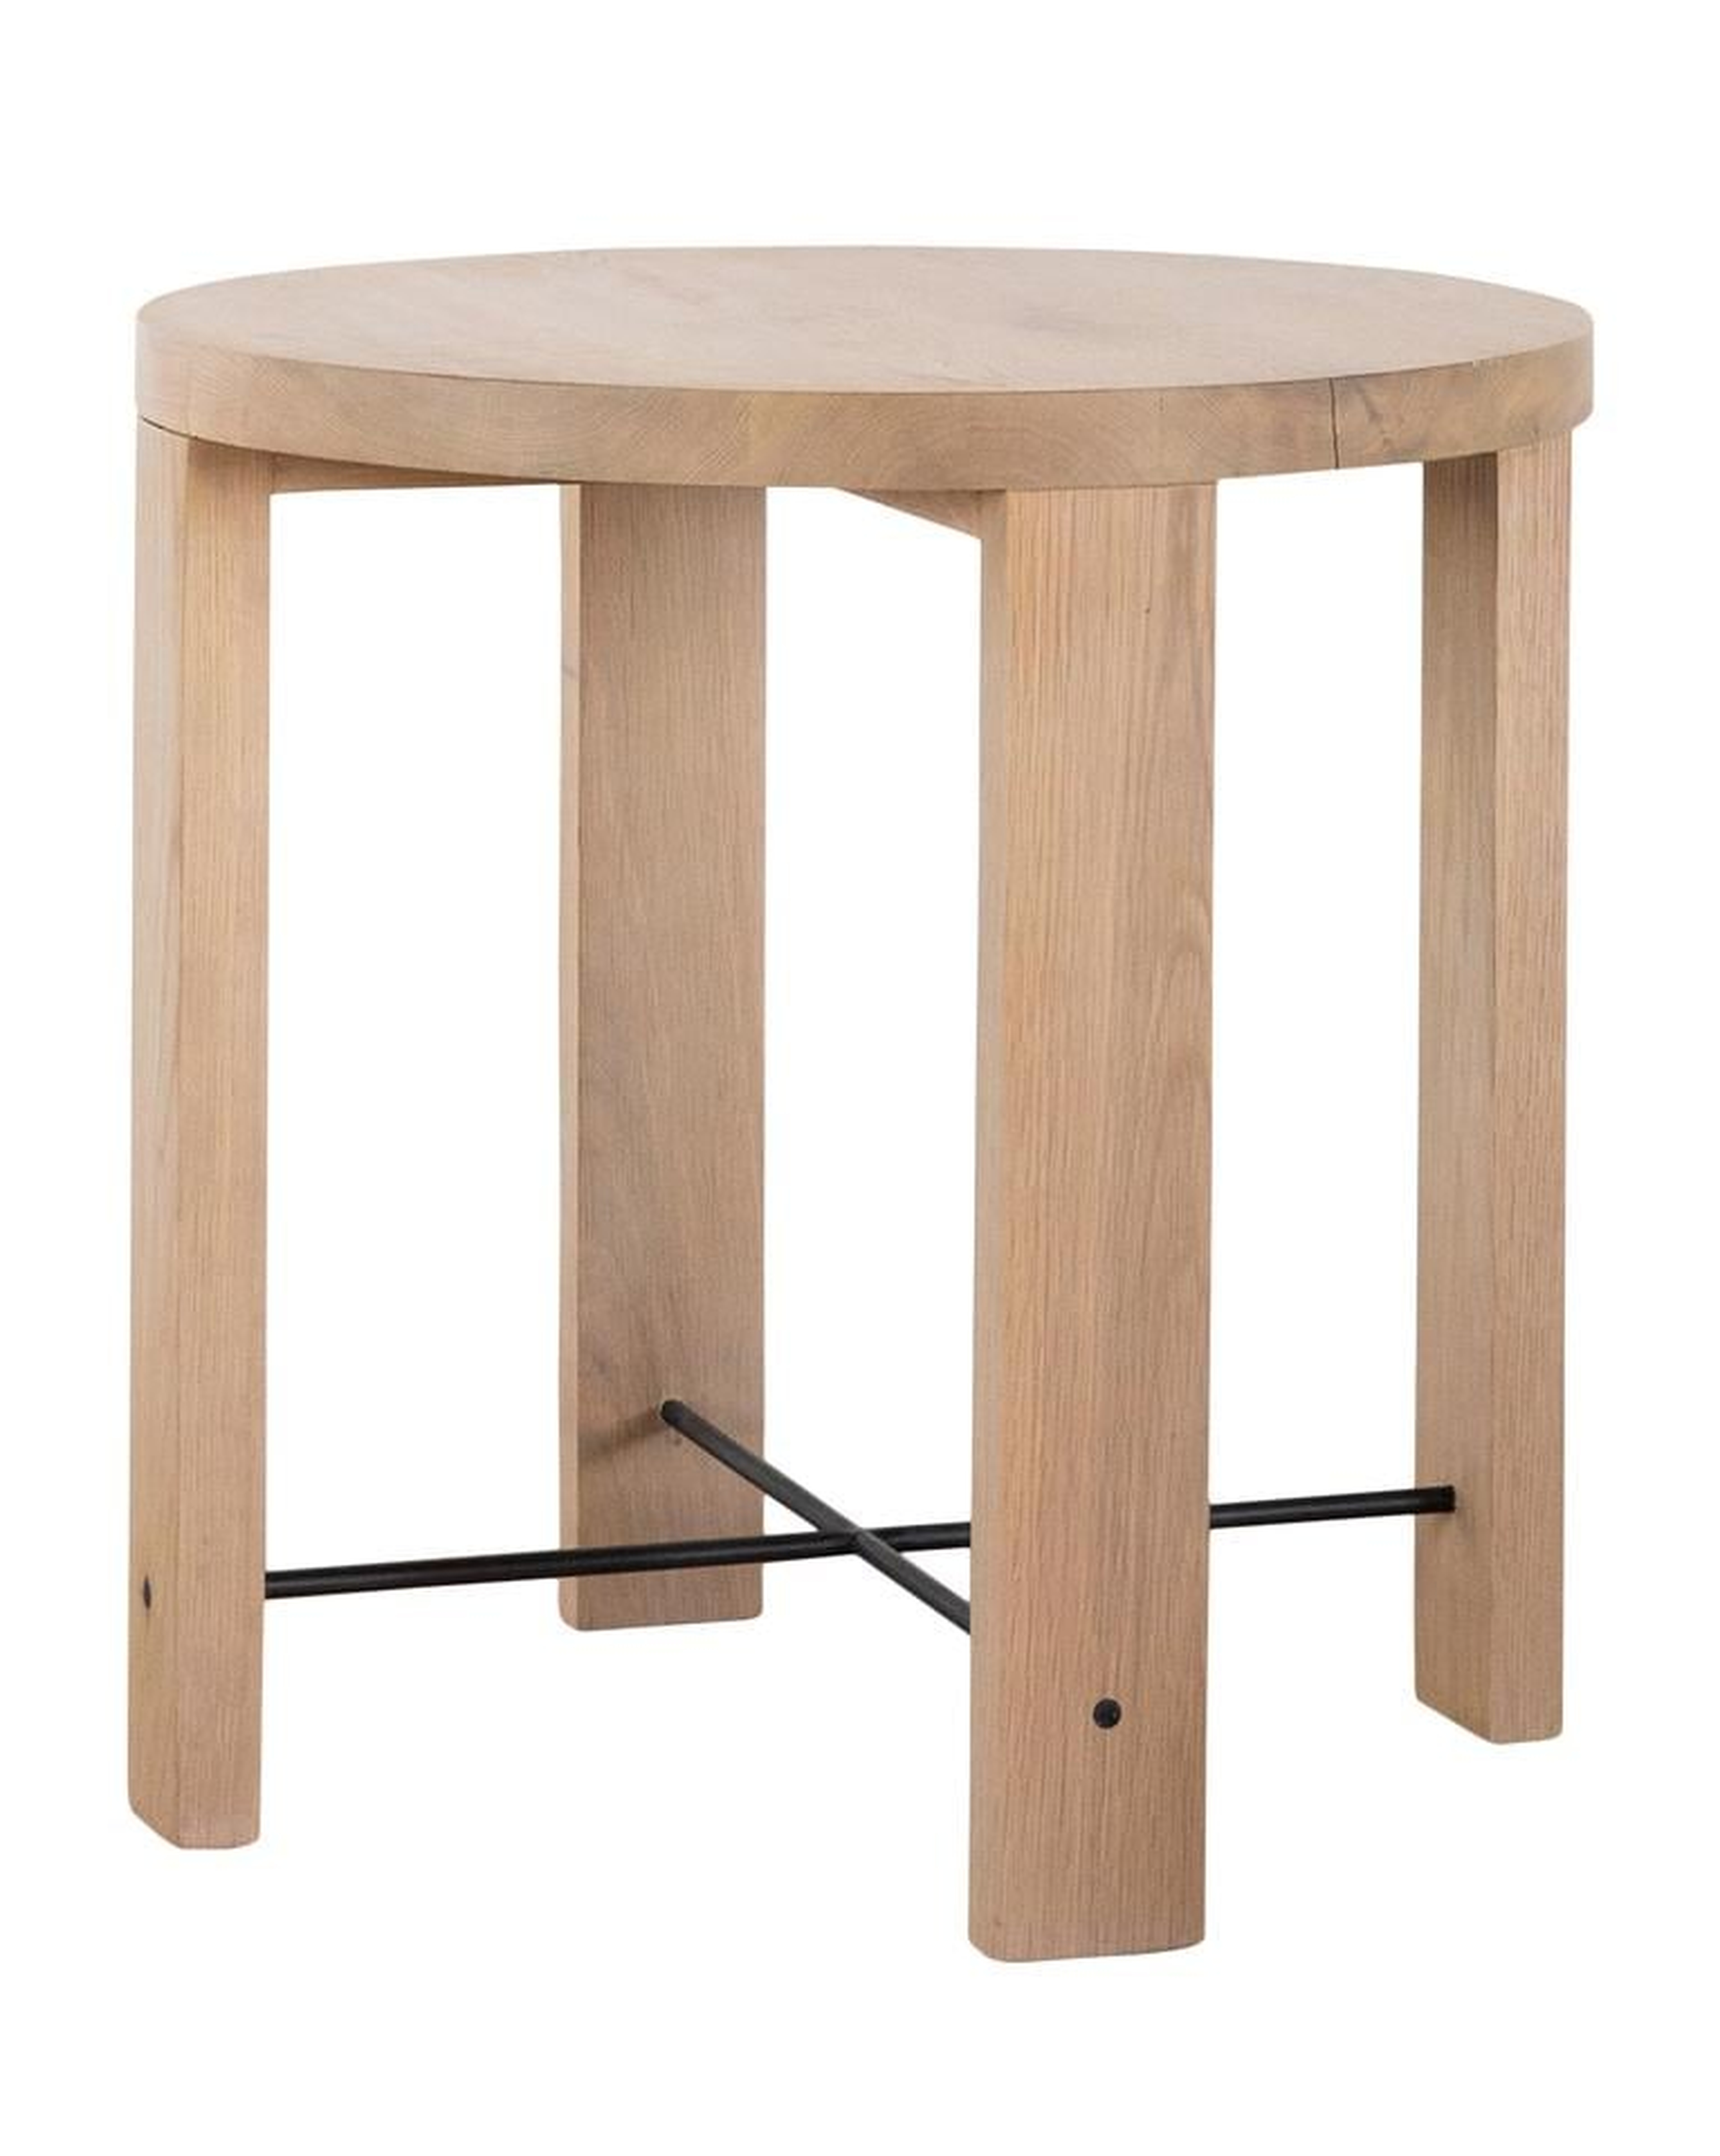 Cora Side Table - McGee & Co.